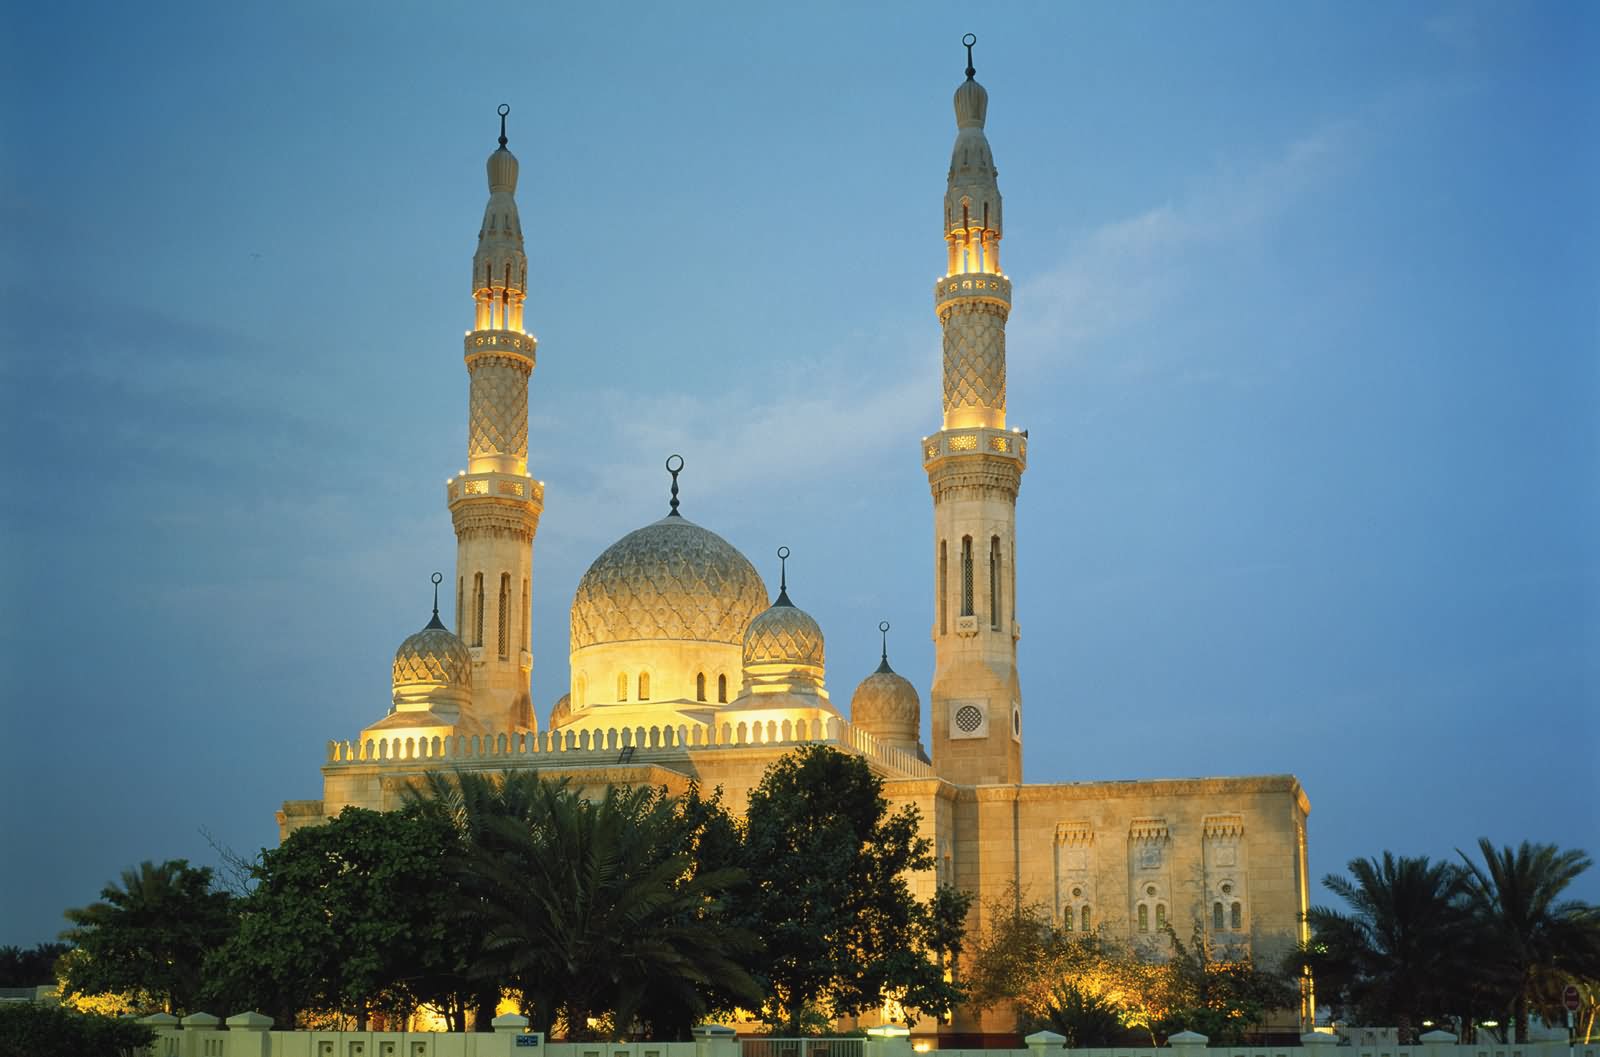 25 Very Beautiful Night View Pictures Of Jumeirah Mosque, Dubai